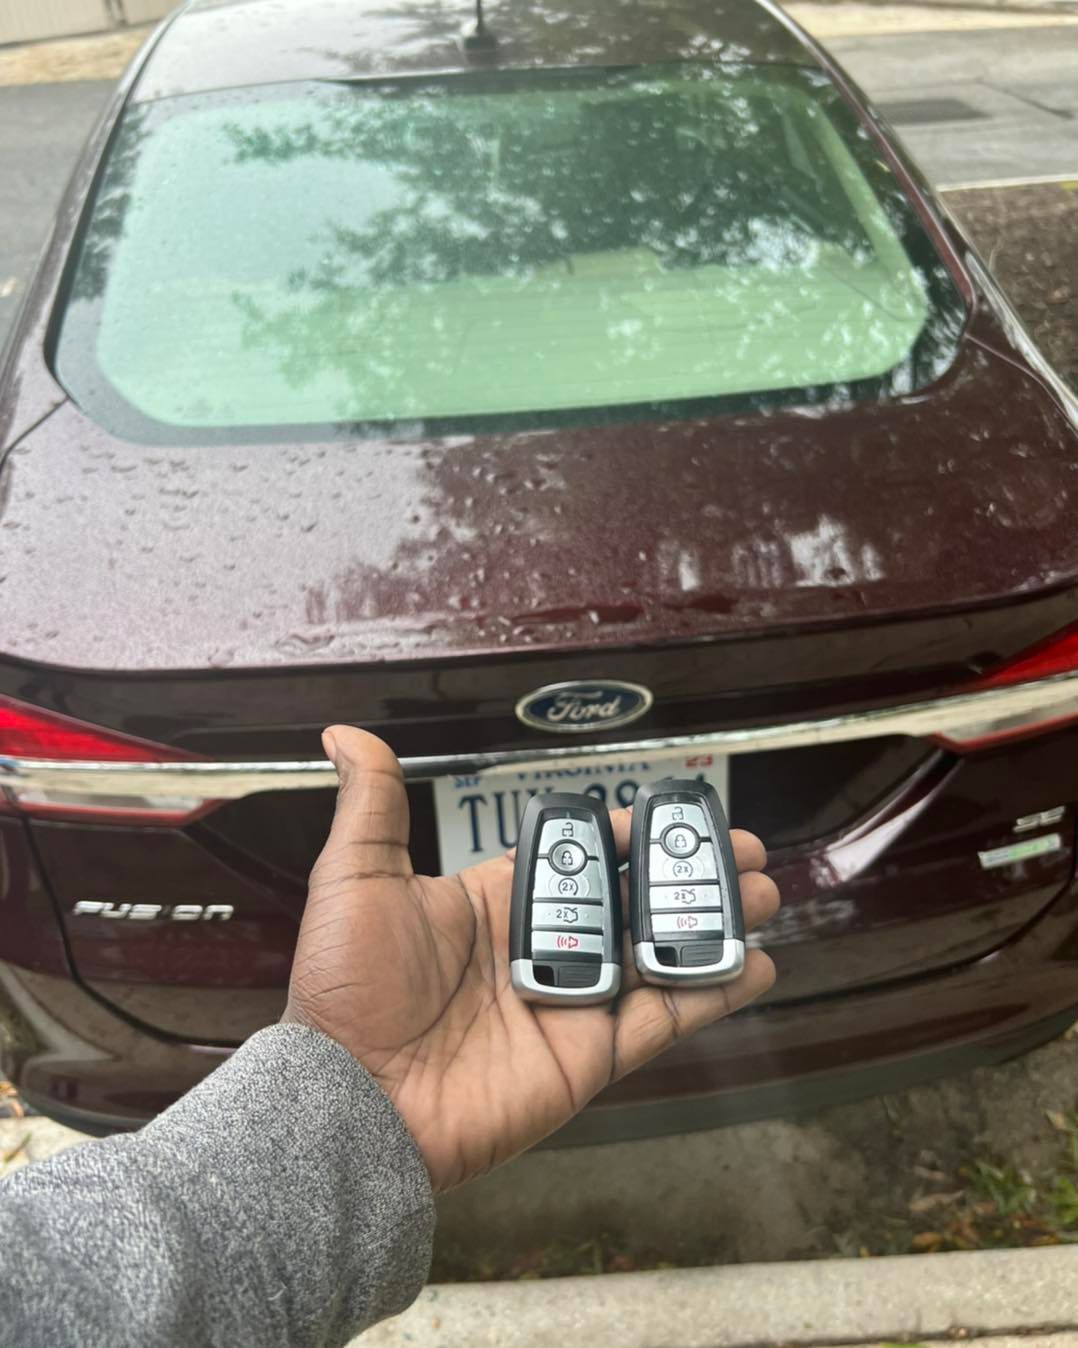 A person is holding two keys in front of a ford car.